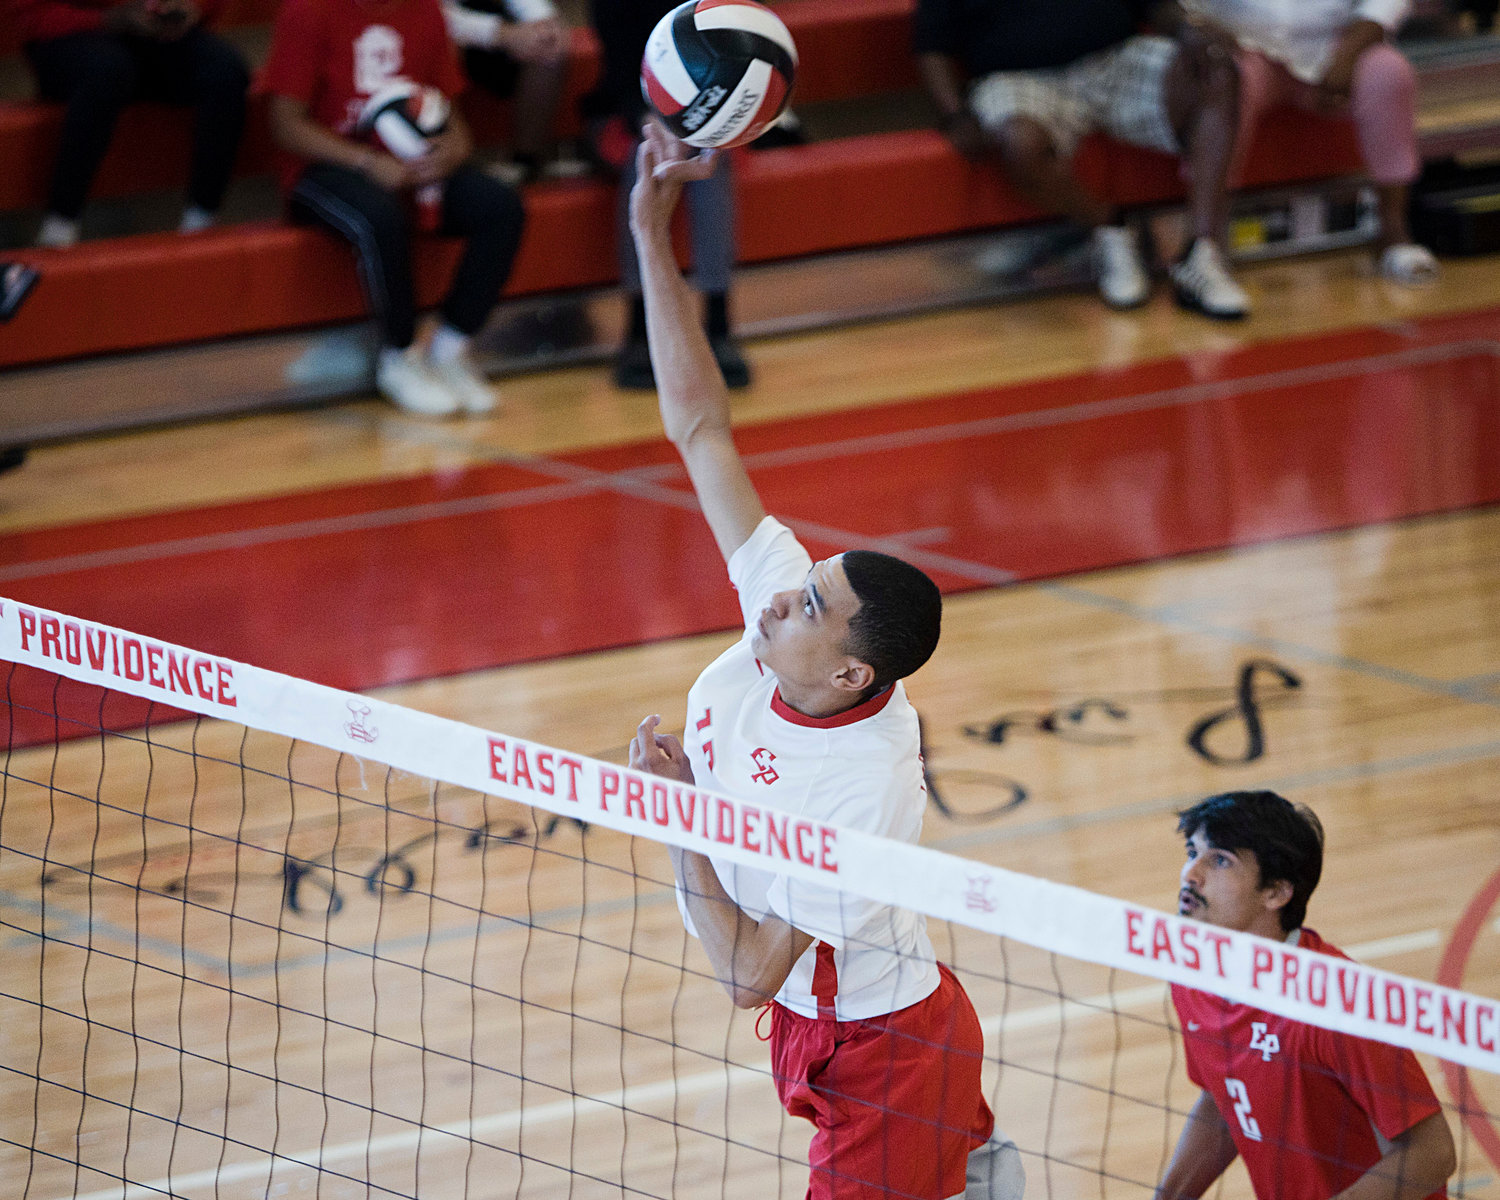 East Providence High School’s Grant Wosencroft tips the ball back over the net in the Division II boys' volleyball semifinals, Wednesday, June 8.